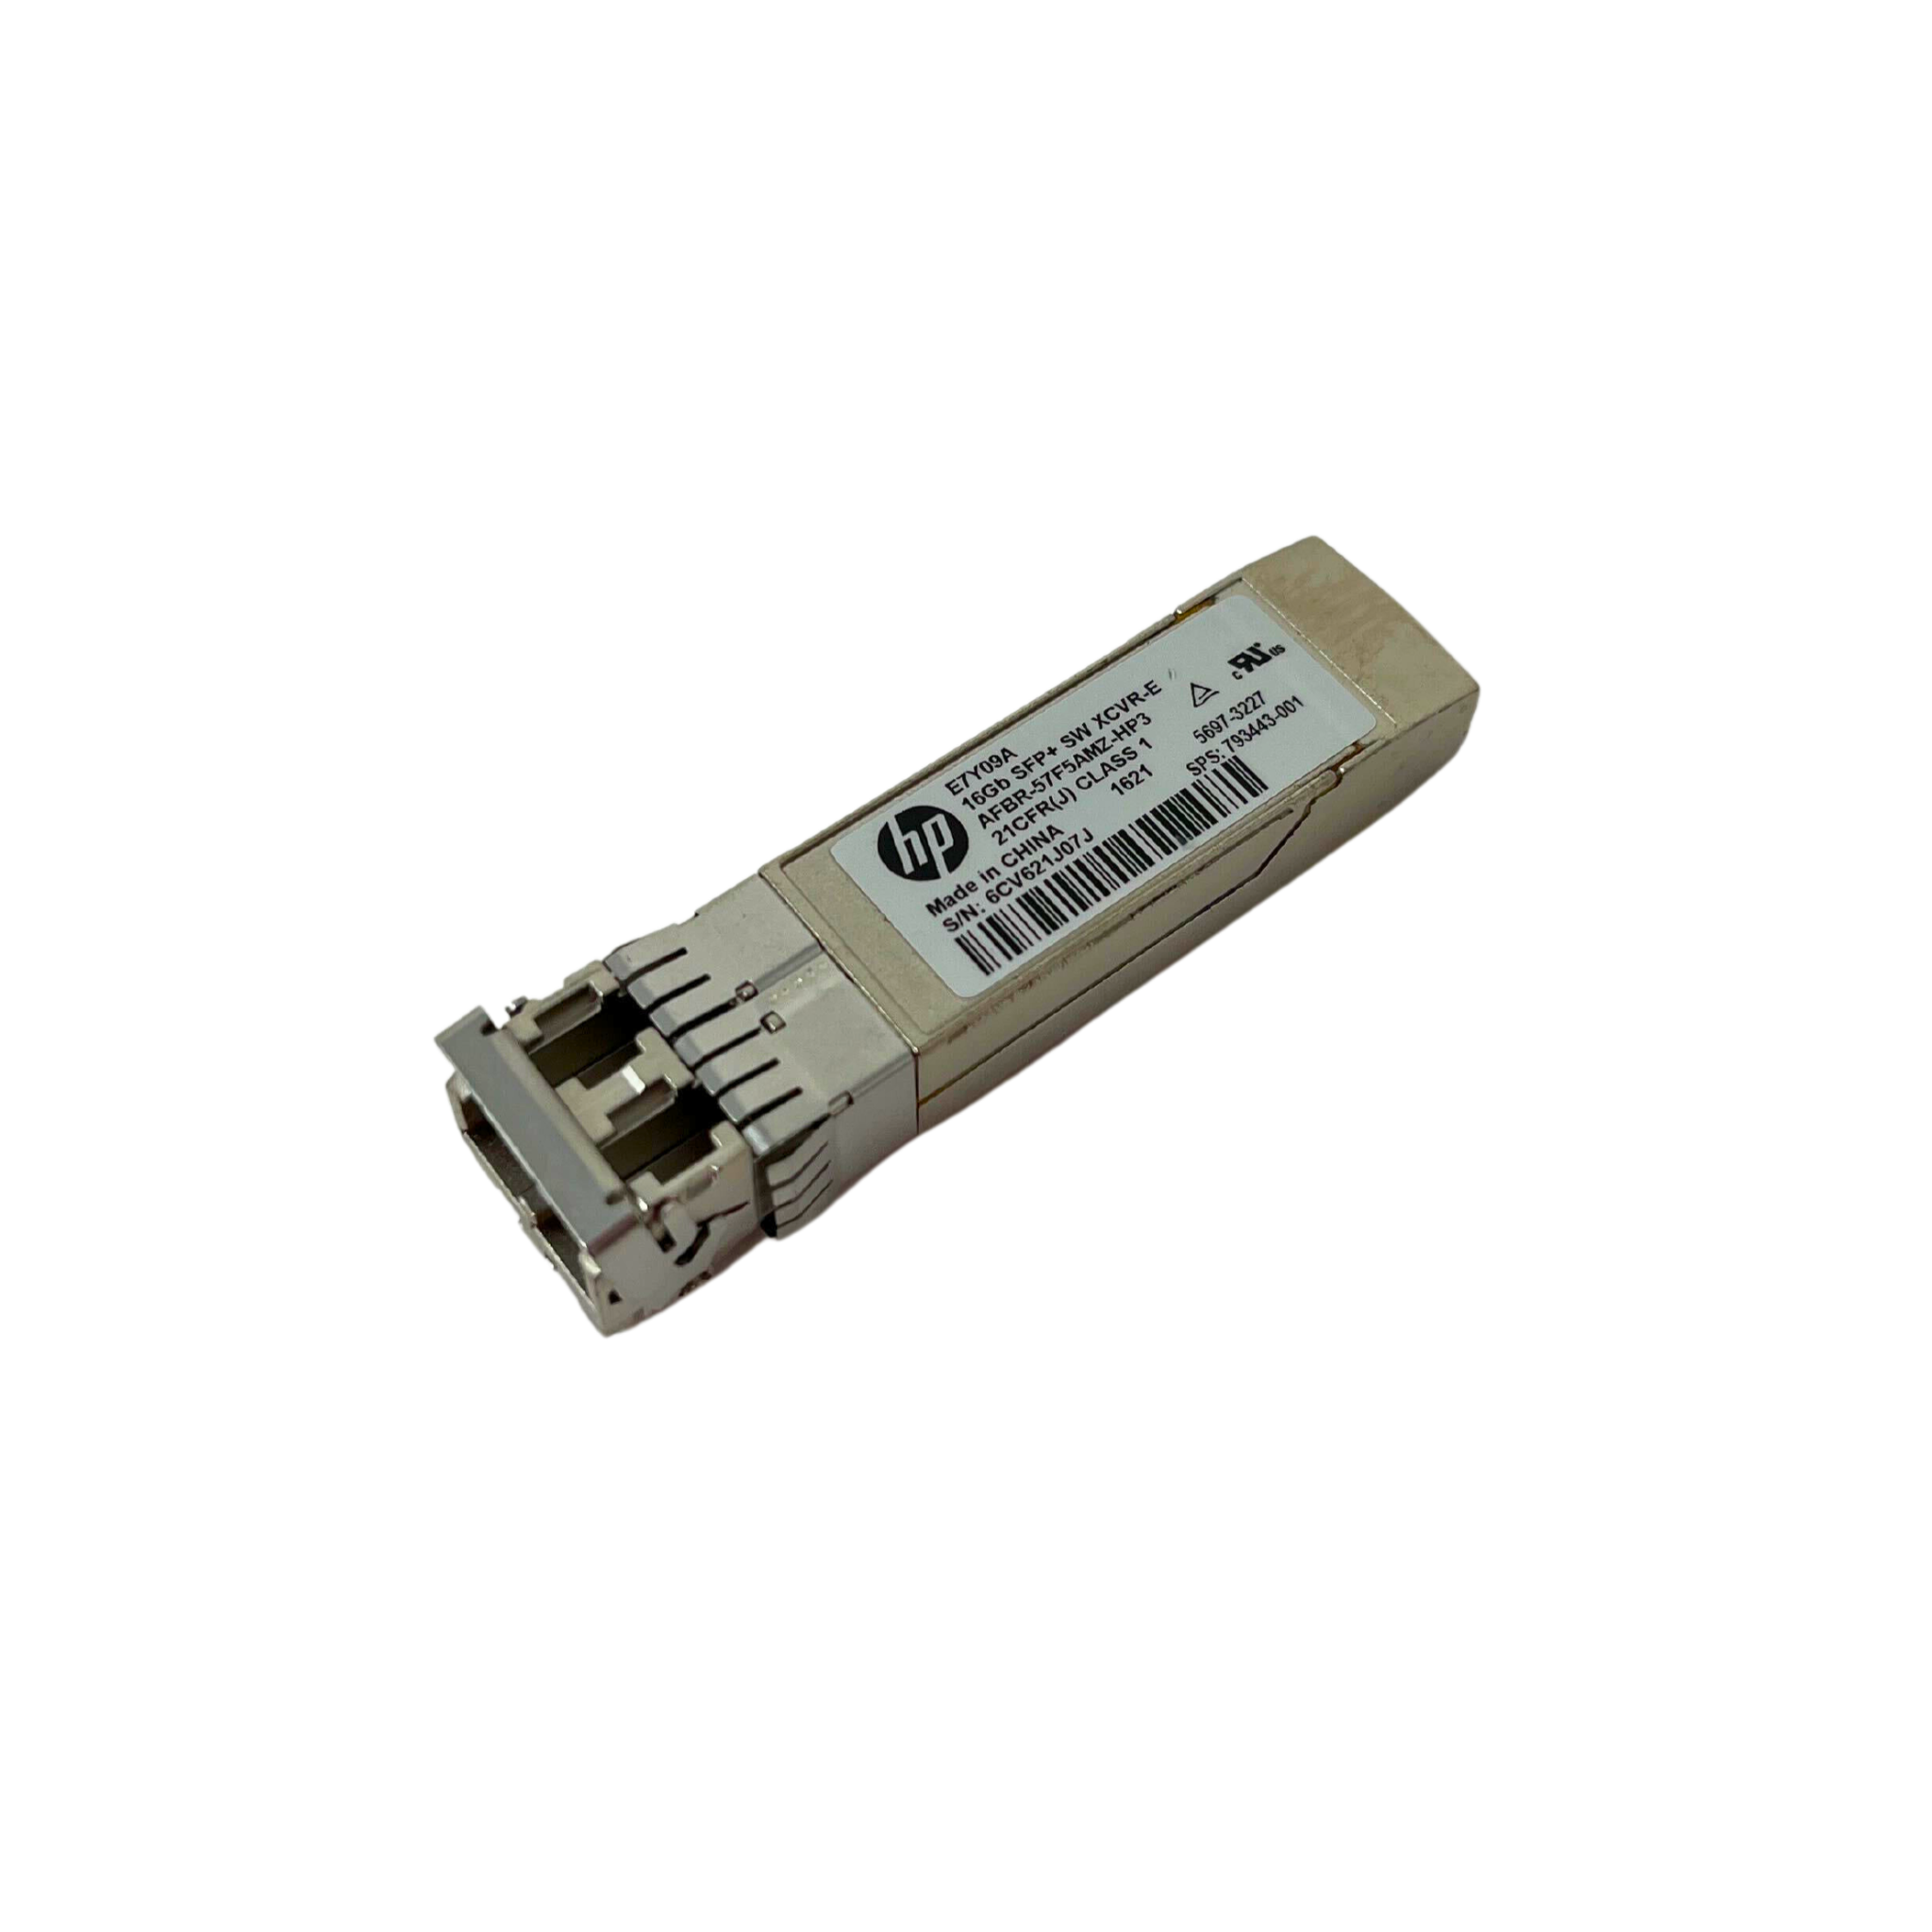 HP E7Y09A 16GB SFP+ Sw Xcvr-E Industrial Extended Transceiver (FTLF8529P3BNVAH1)